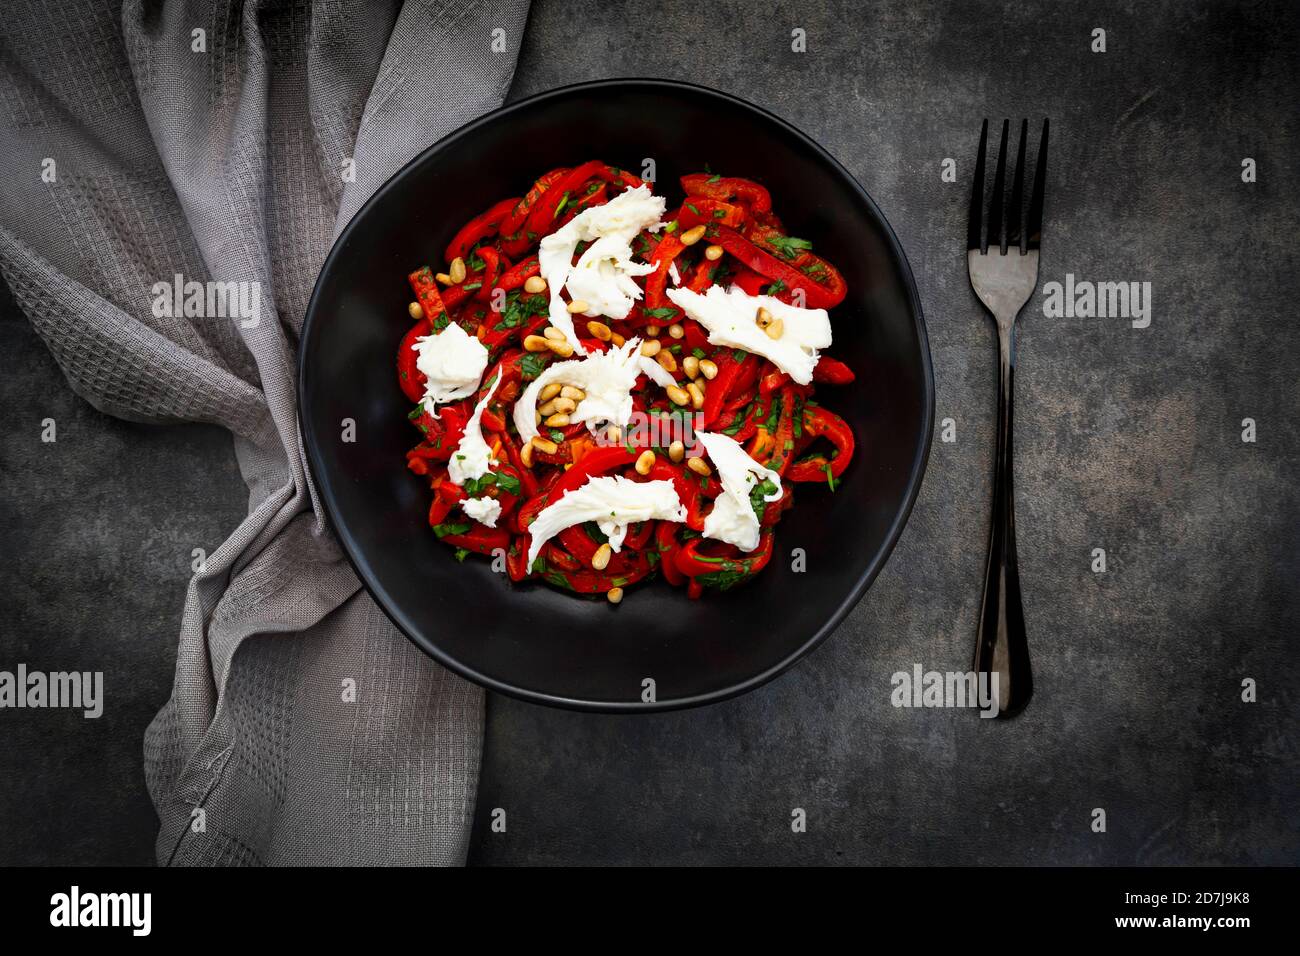 Bowl of vegetarian salad with red bell peppers, mozzarella, roasted pine nuts, parsley and chive Stock Photo